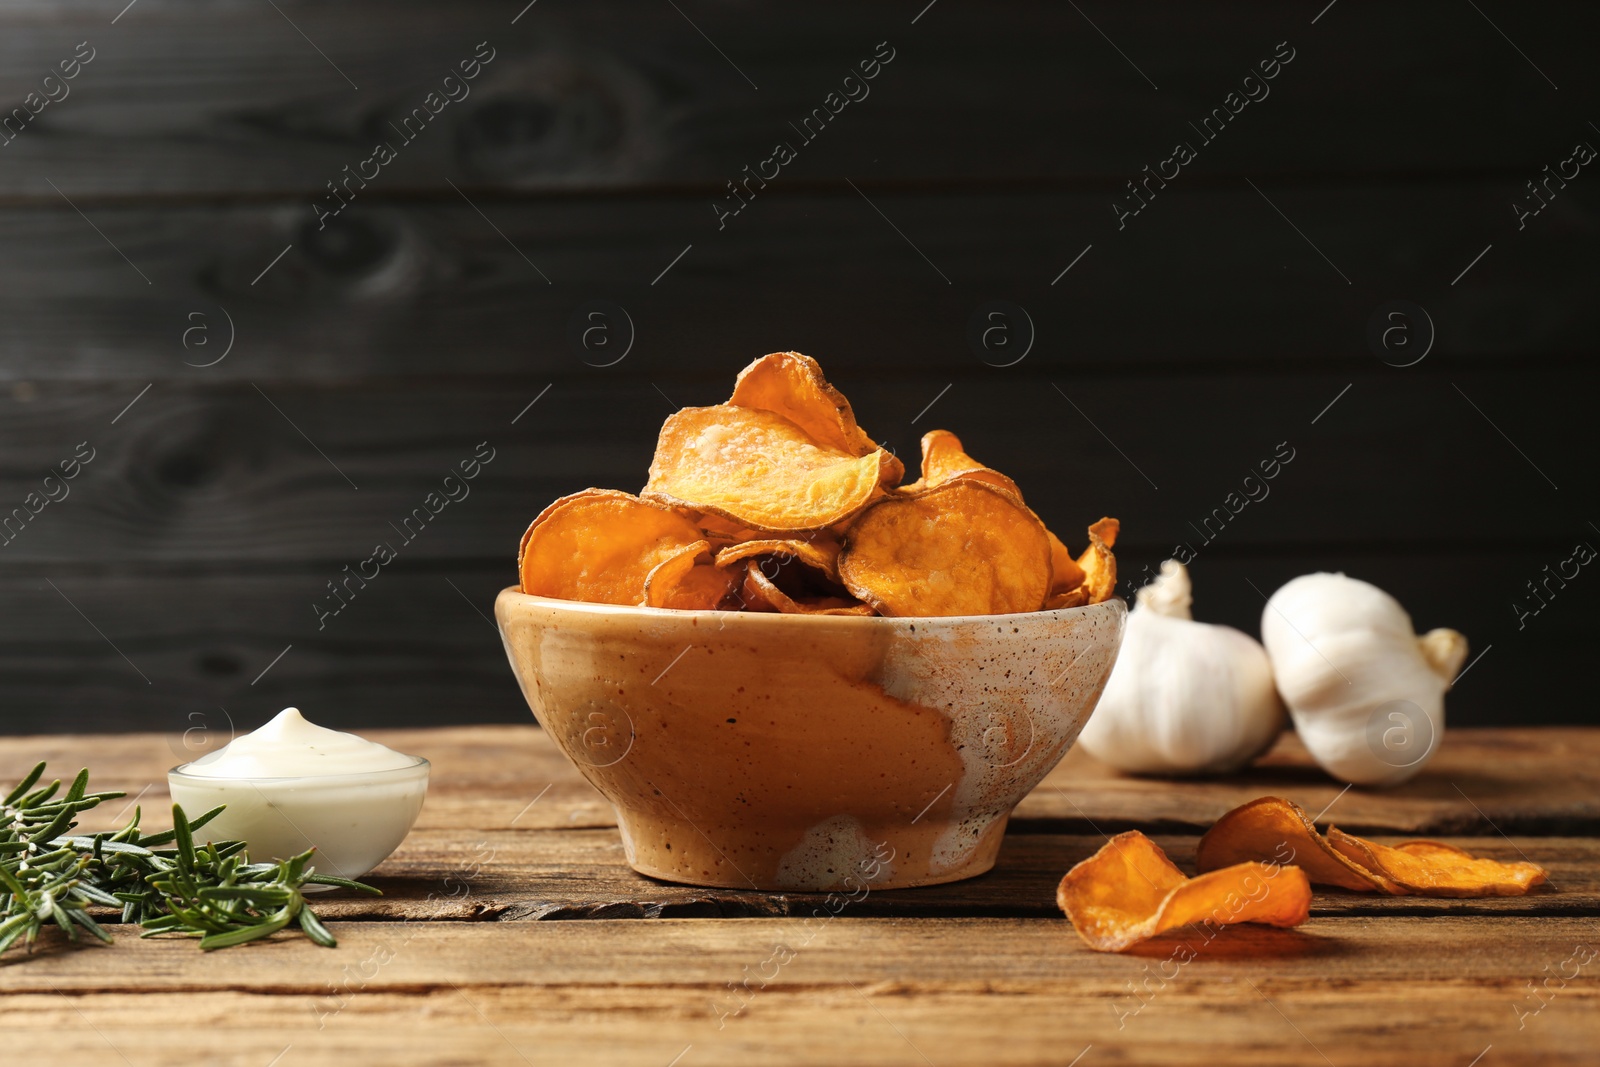 Photo of Delicious sweet potato chips in bowl, rosemary and sauce on table